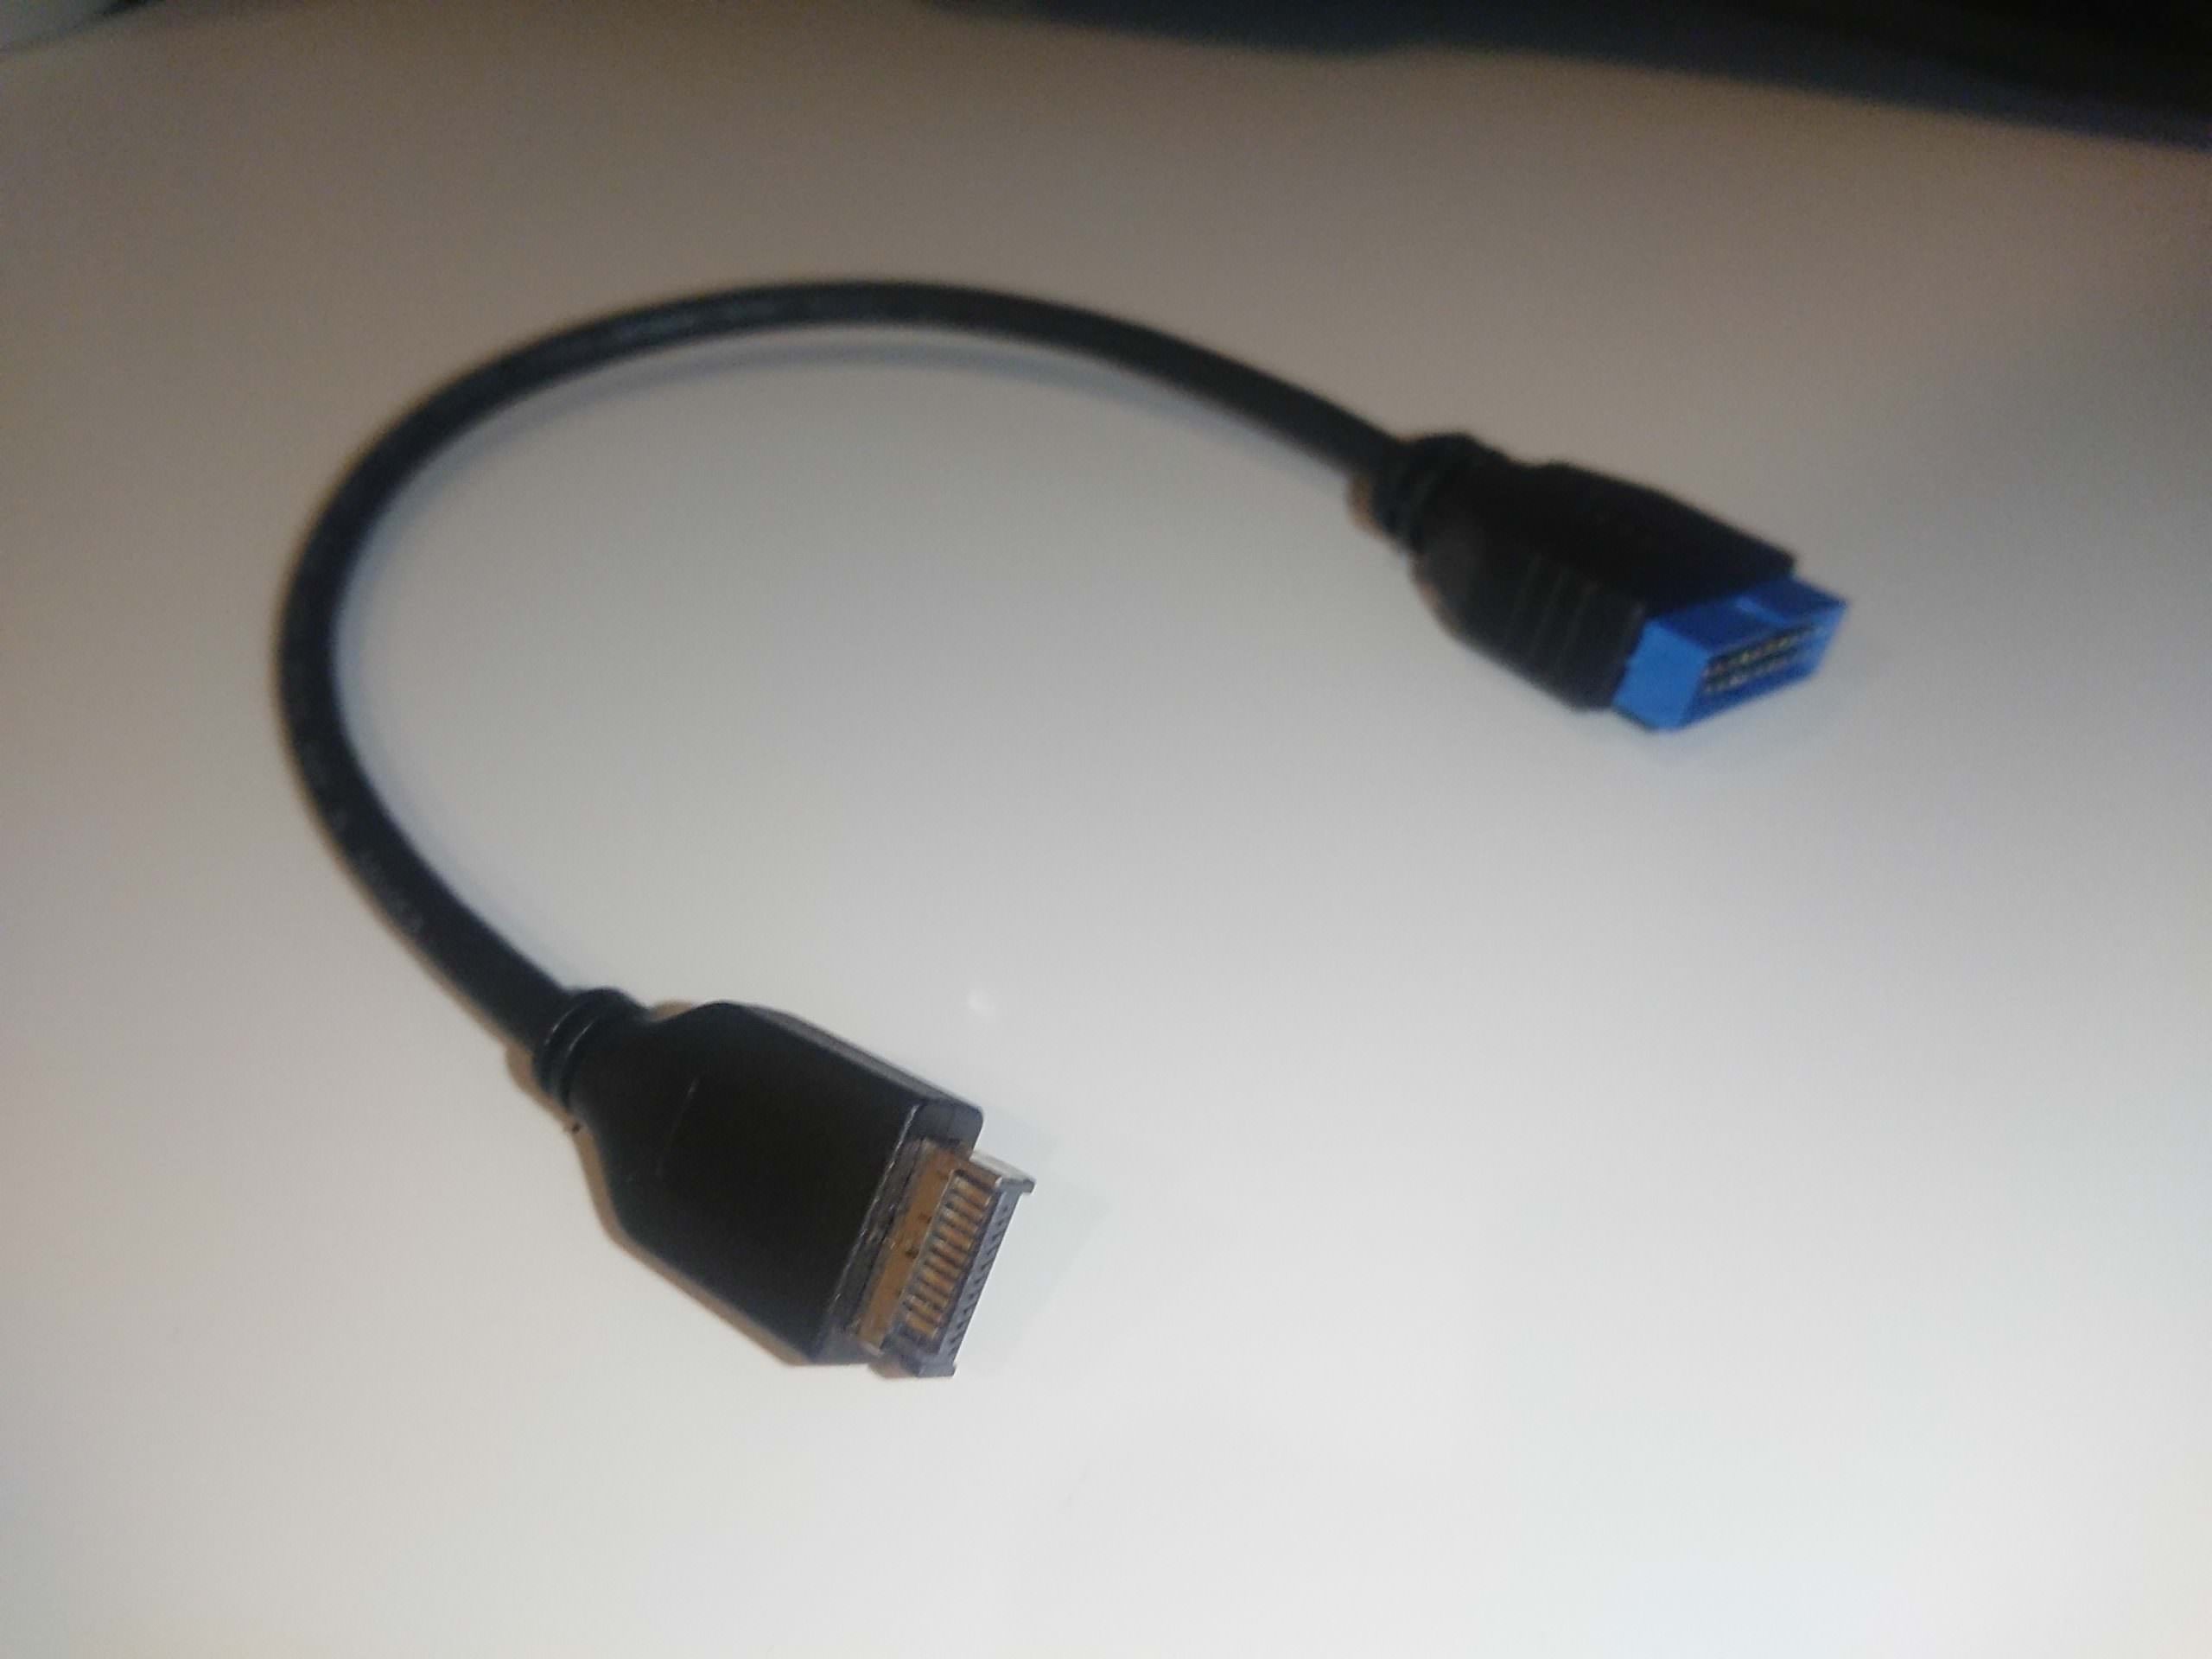 USB 3.1 to USB 3.0 cable